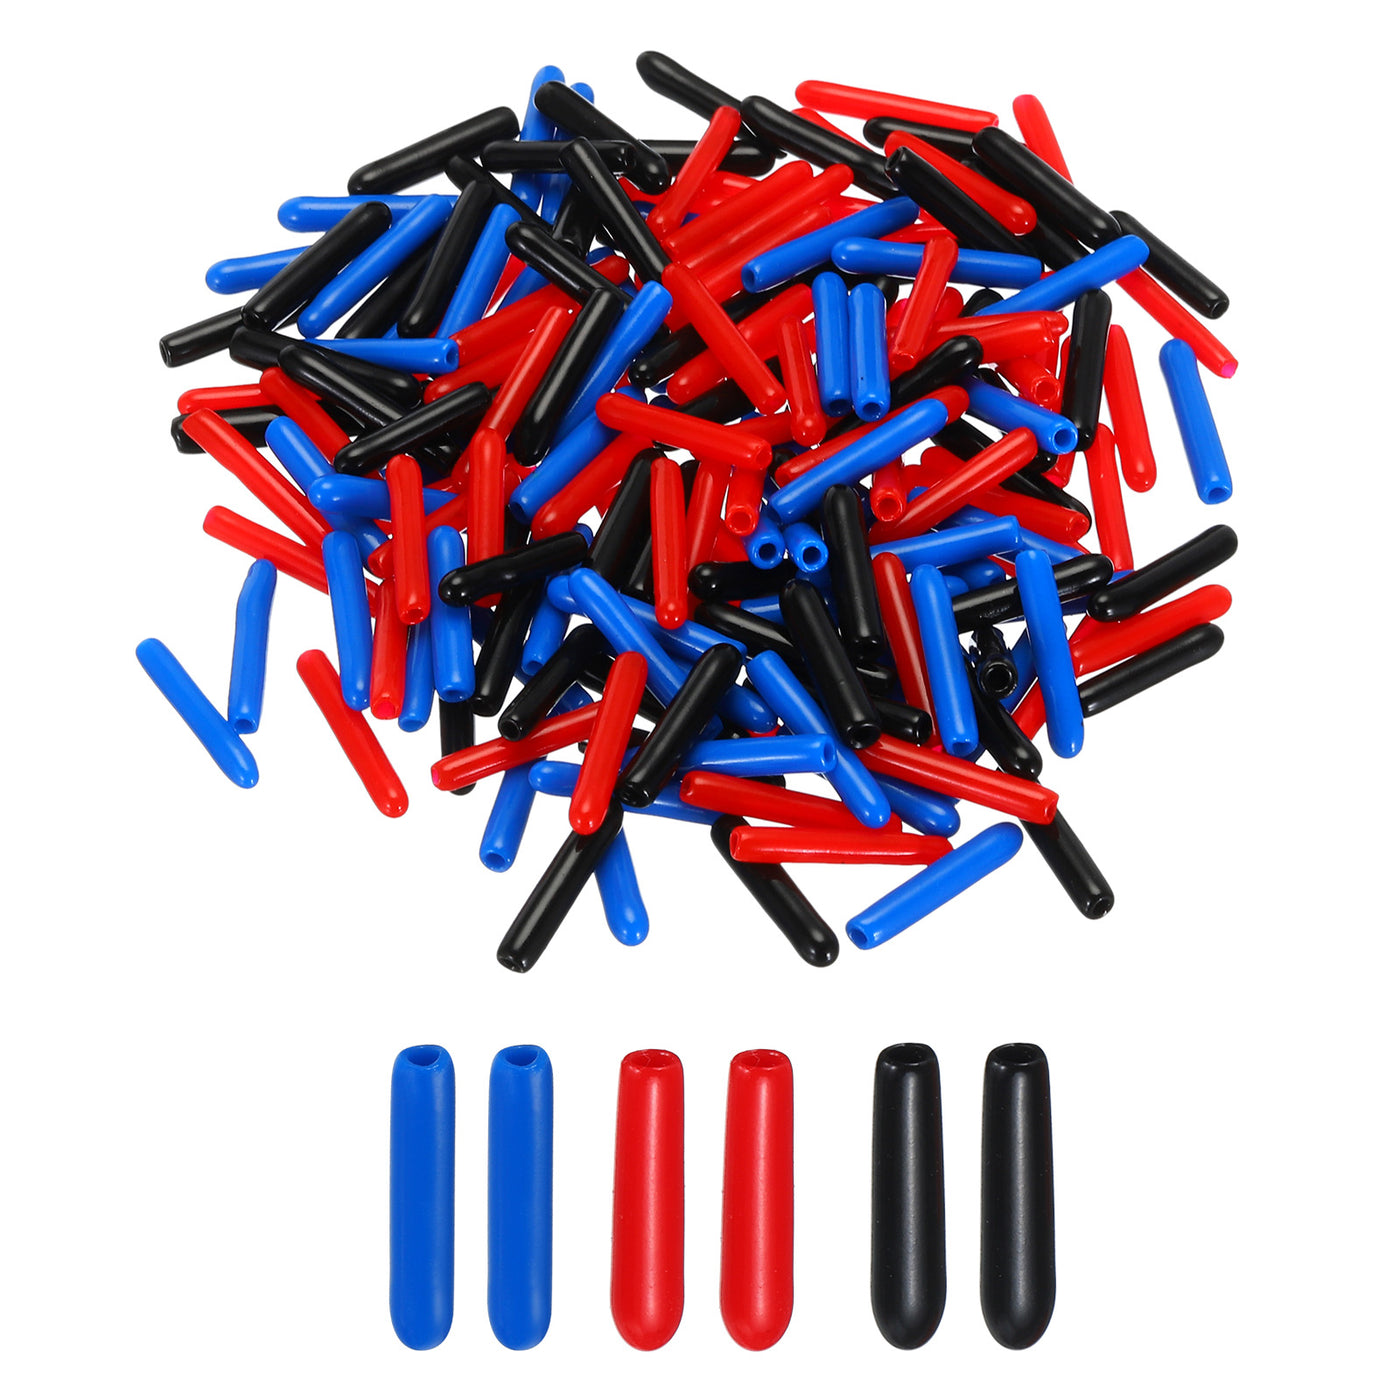 uxcell Uxcell 180pcs Rubber End Caps 1.5mm ID Vinyl PVC Round Tube Bolt Cap Cover Screw Thread Protectors, Black Red Blue